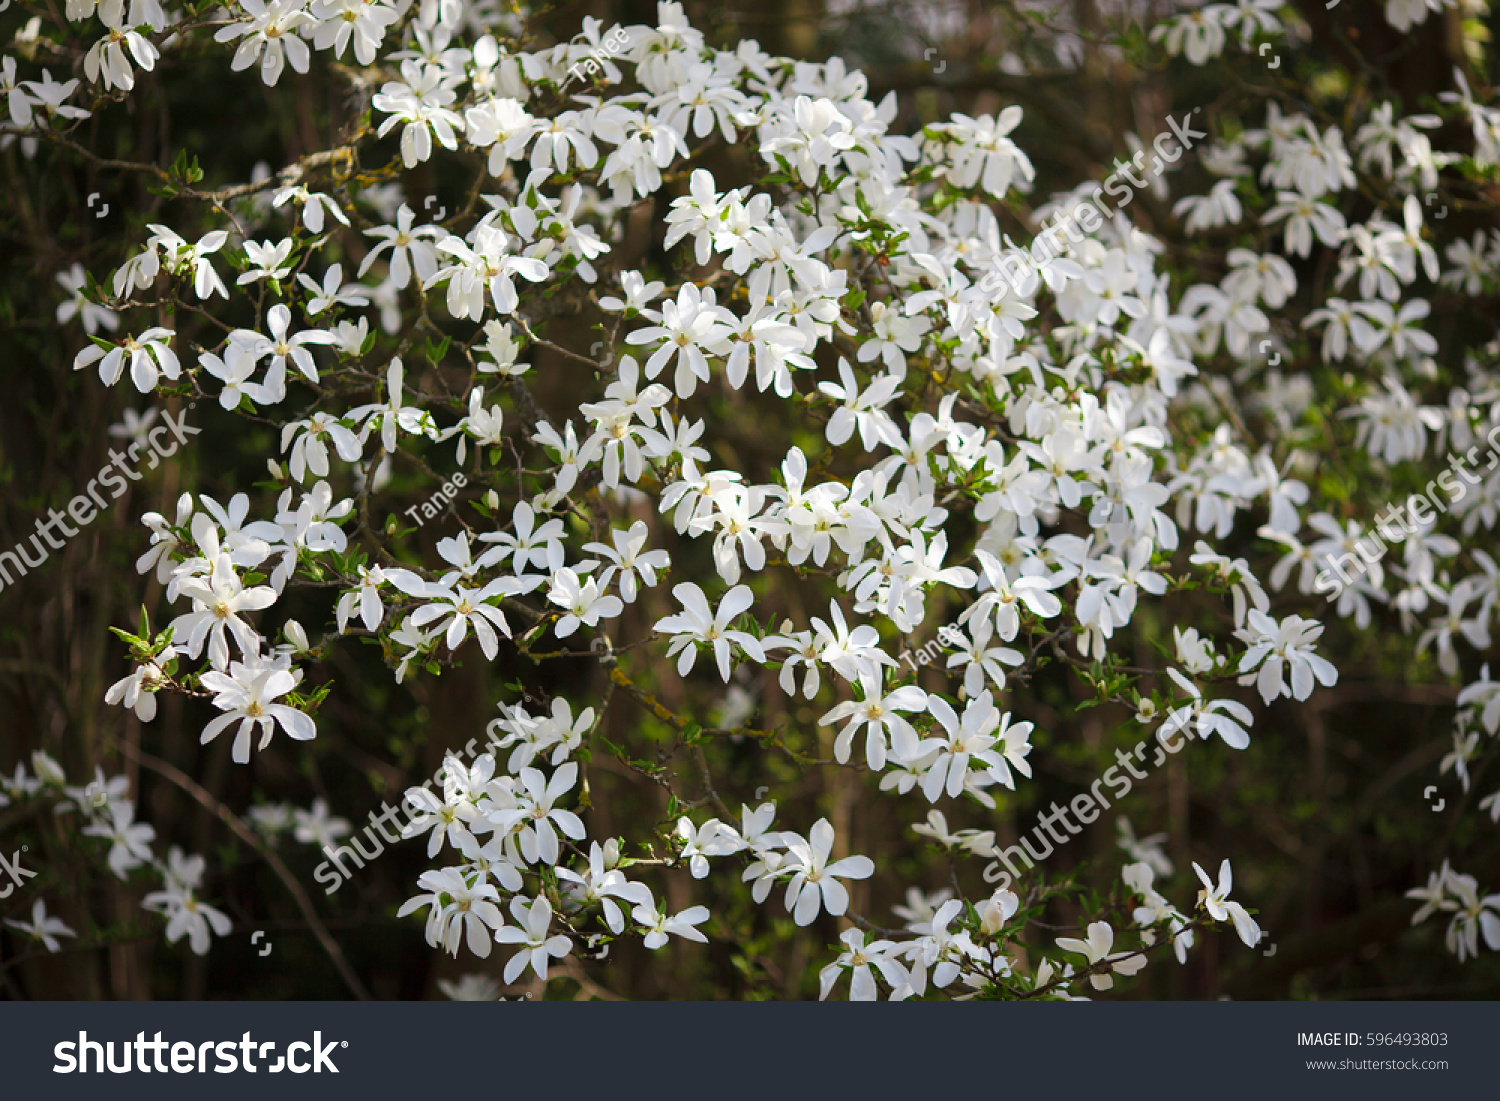 1 Whitemagnoliablossom Images, Stock Photos & Vectors | Shutterstock